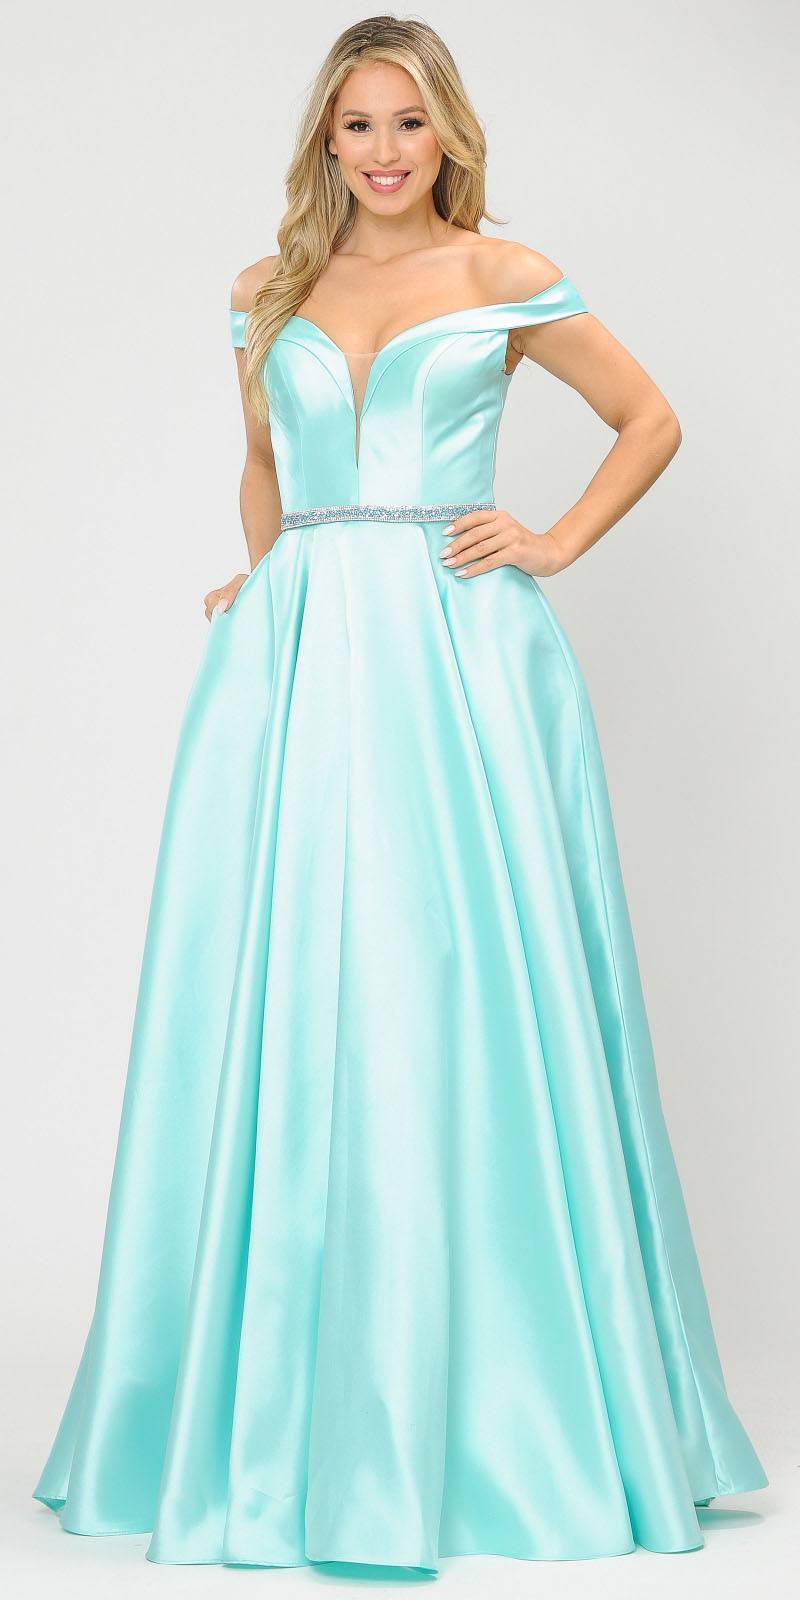 Poly USA 8686 Silky Satin Off-Shoulder Long Prom Dress Mint with Pockets